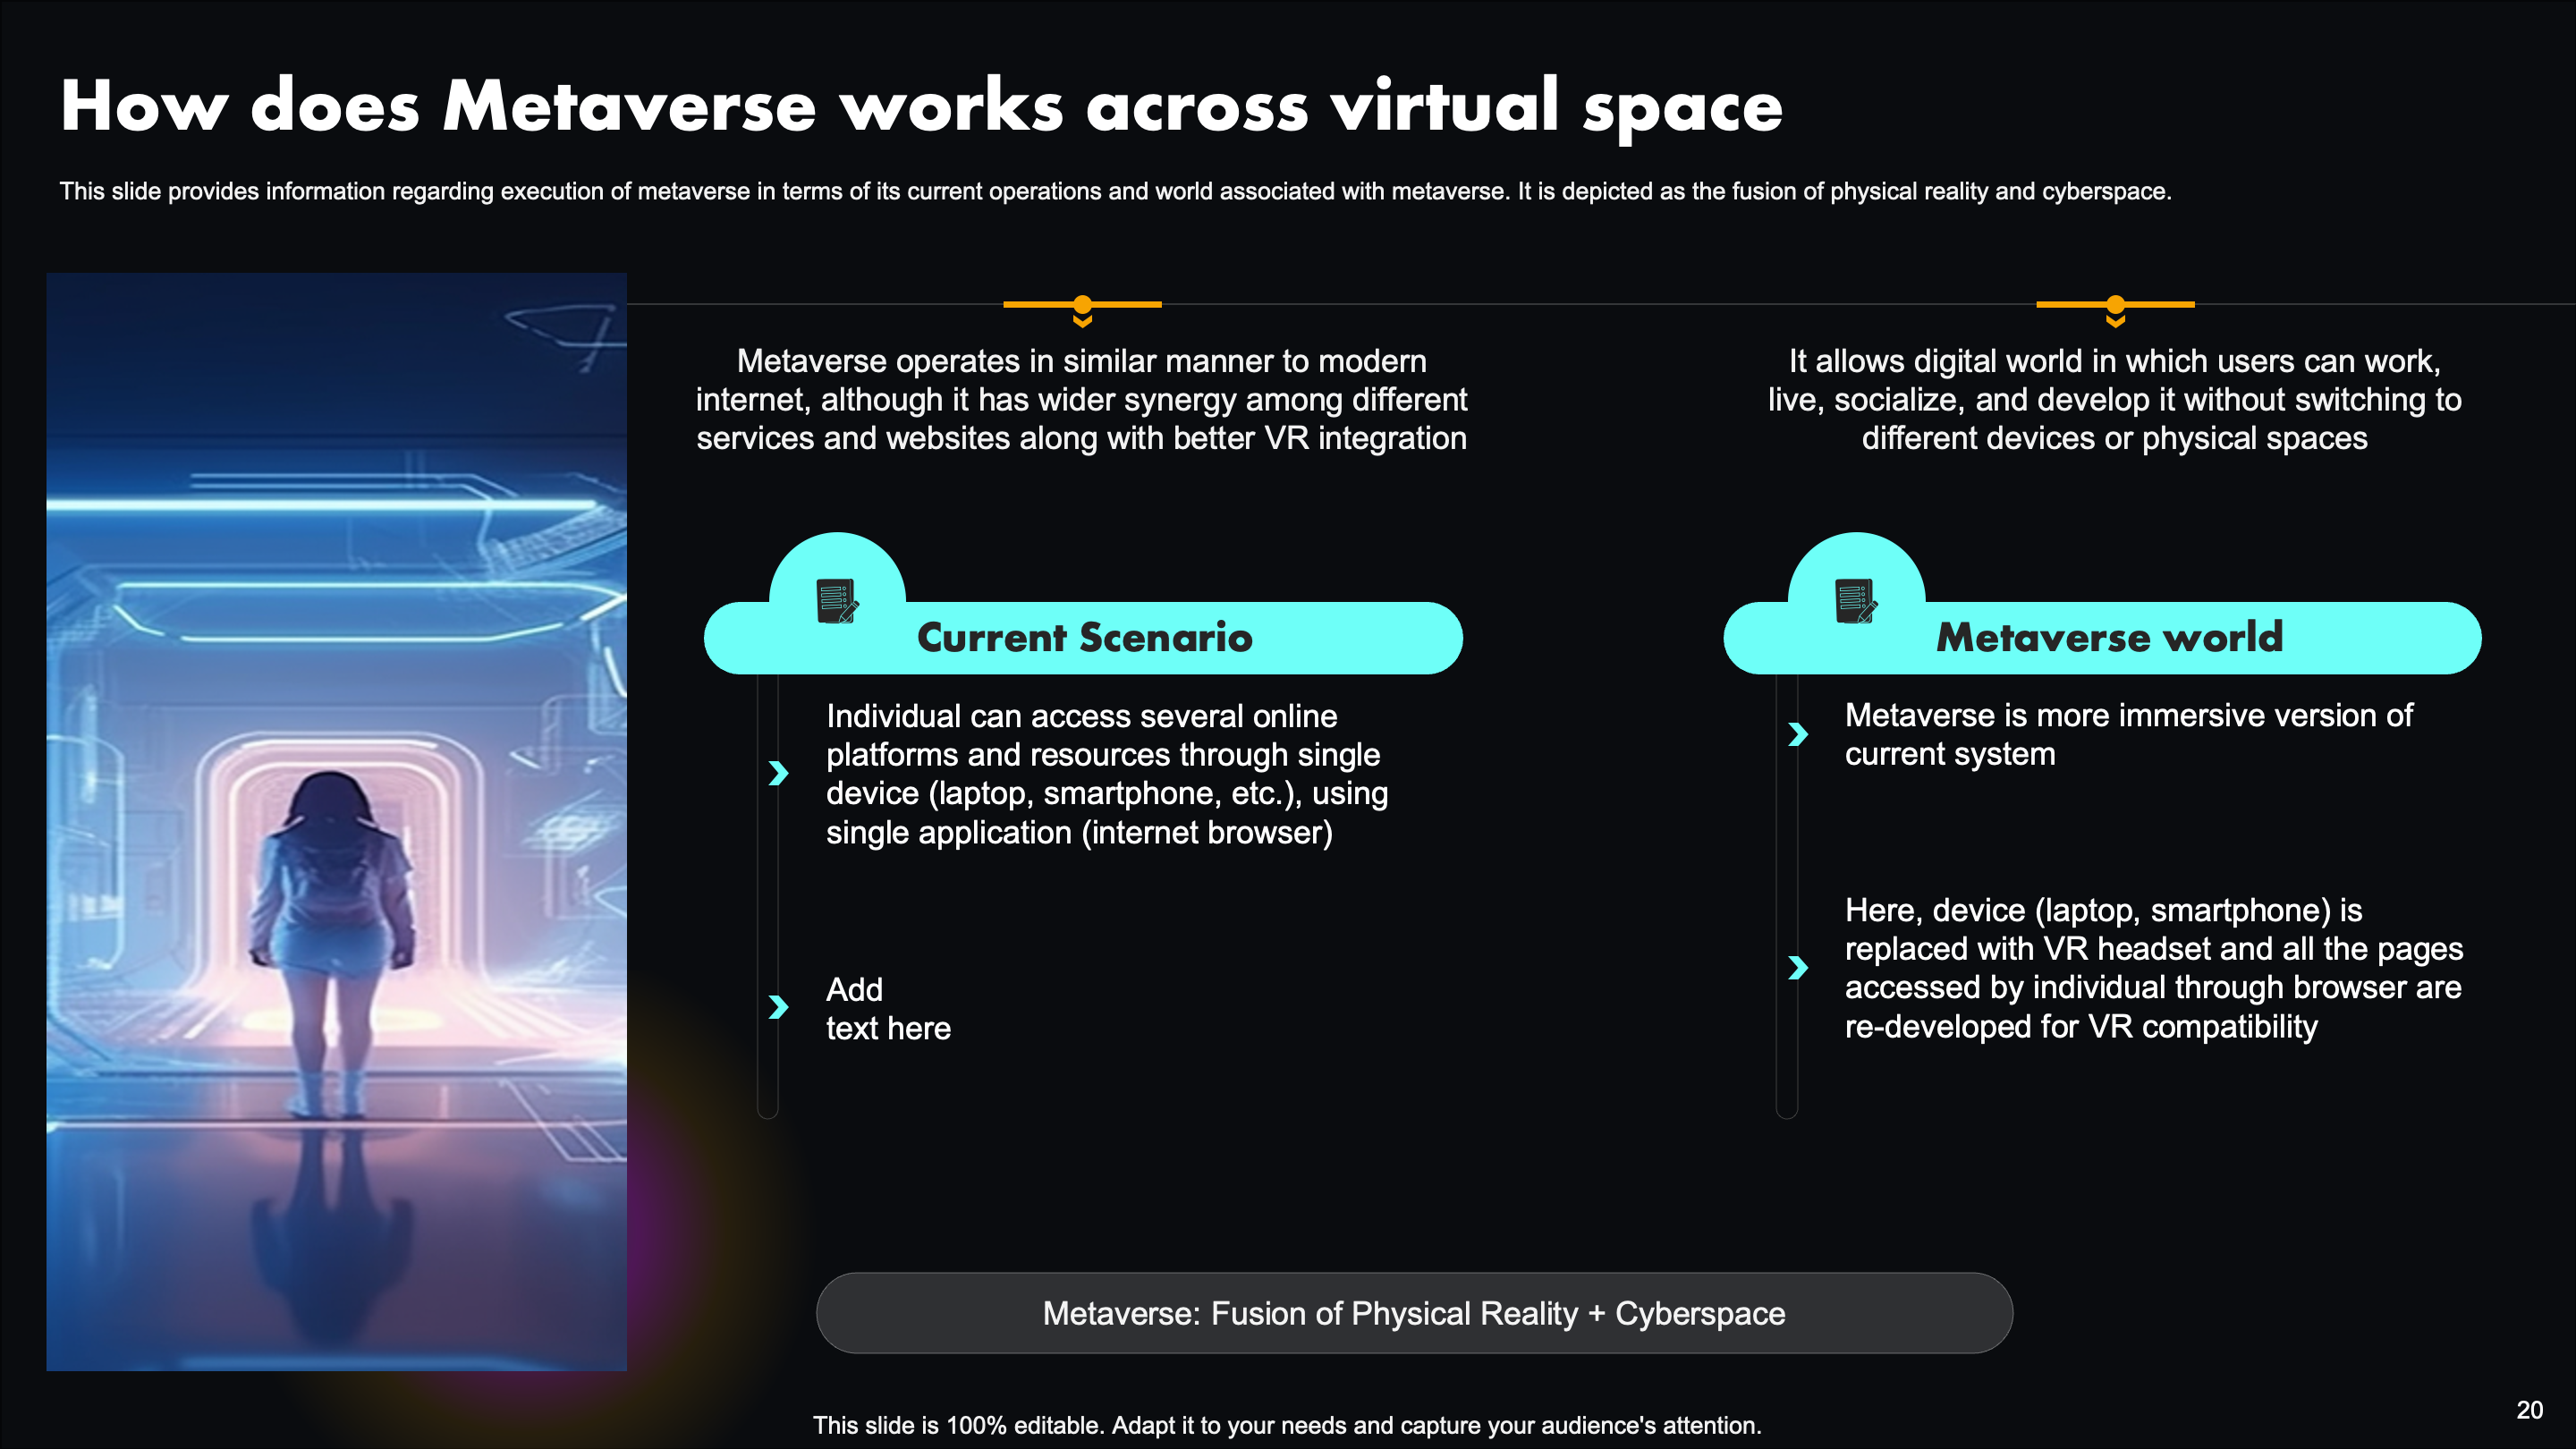 How Does Metaverse Works Across Virtual Space?